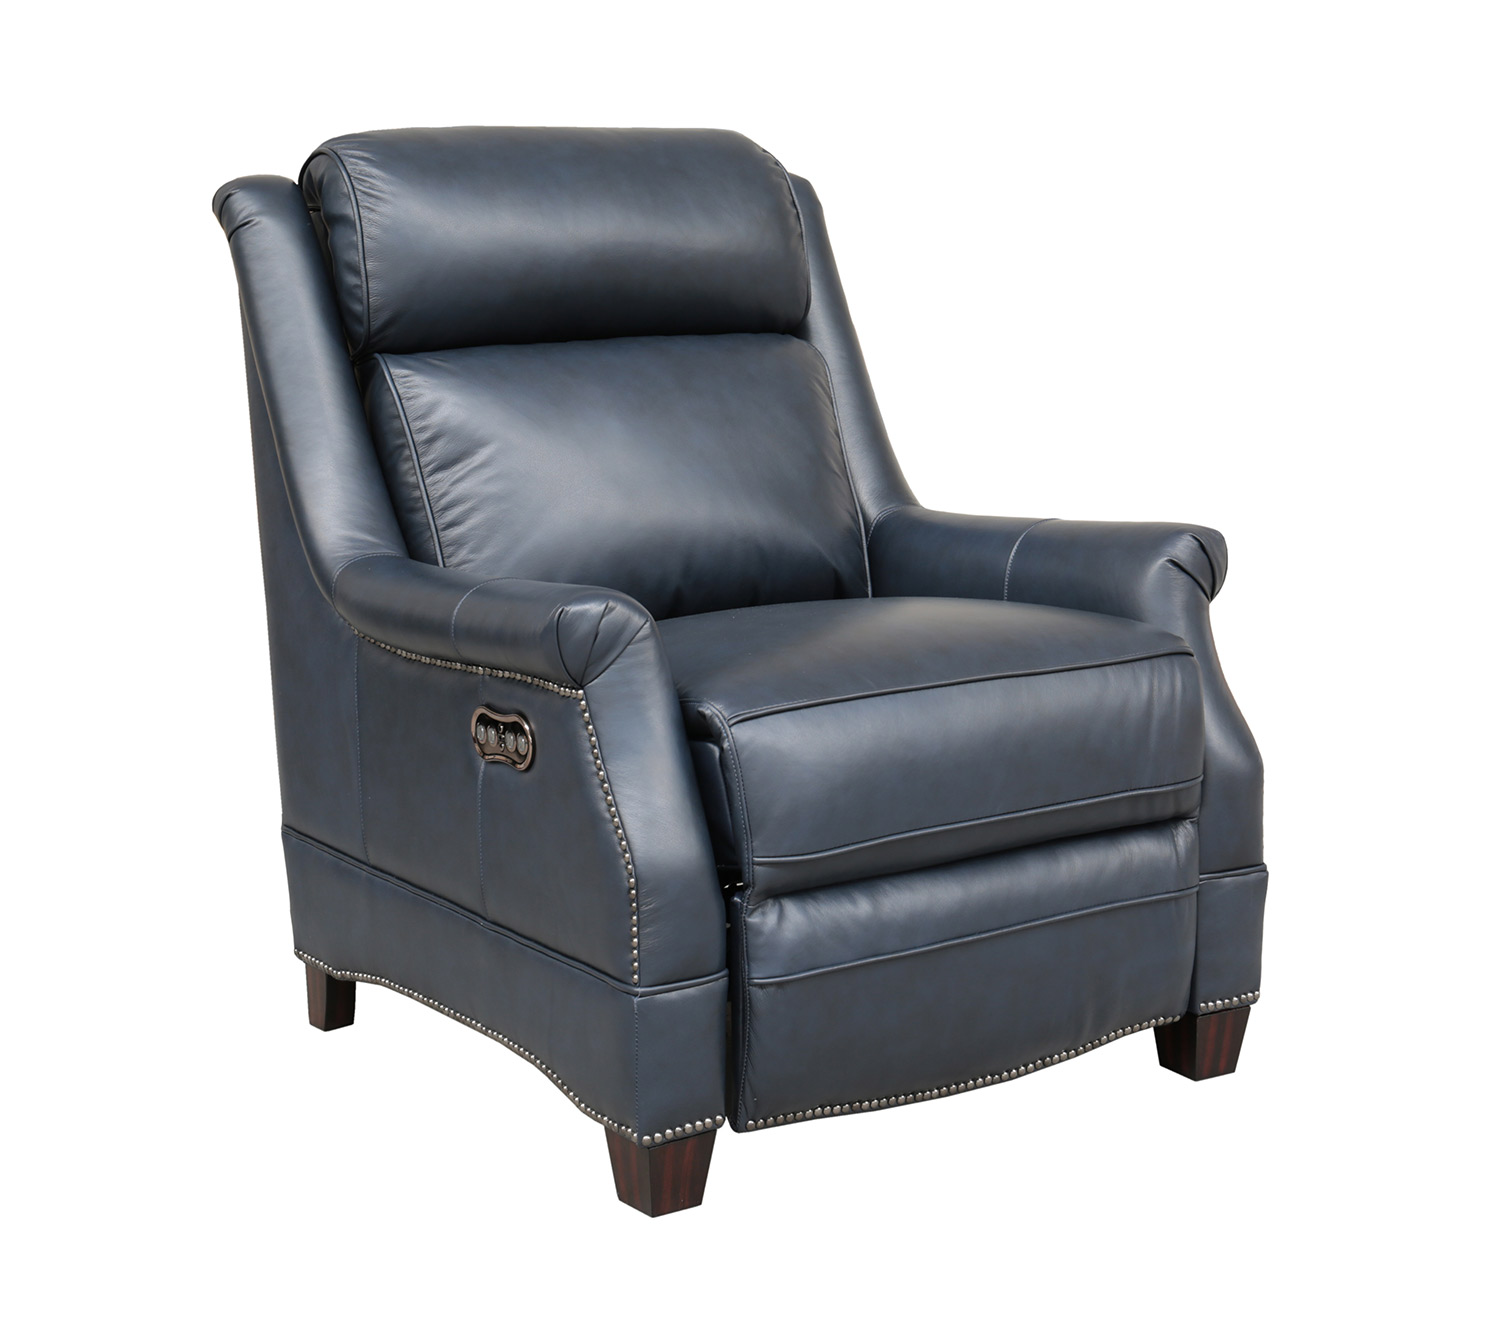 Barcalounger Warrendale Power Recliner Chair with Power Head Rest - Shoreham Blue/All Leather